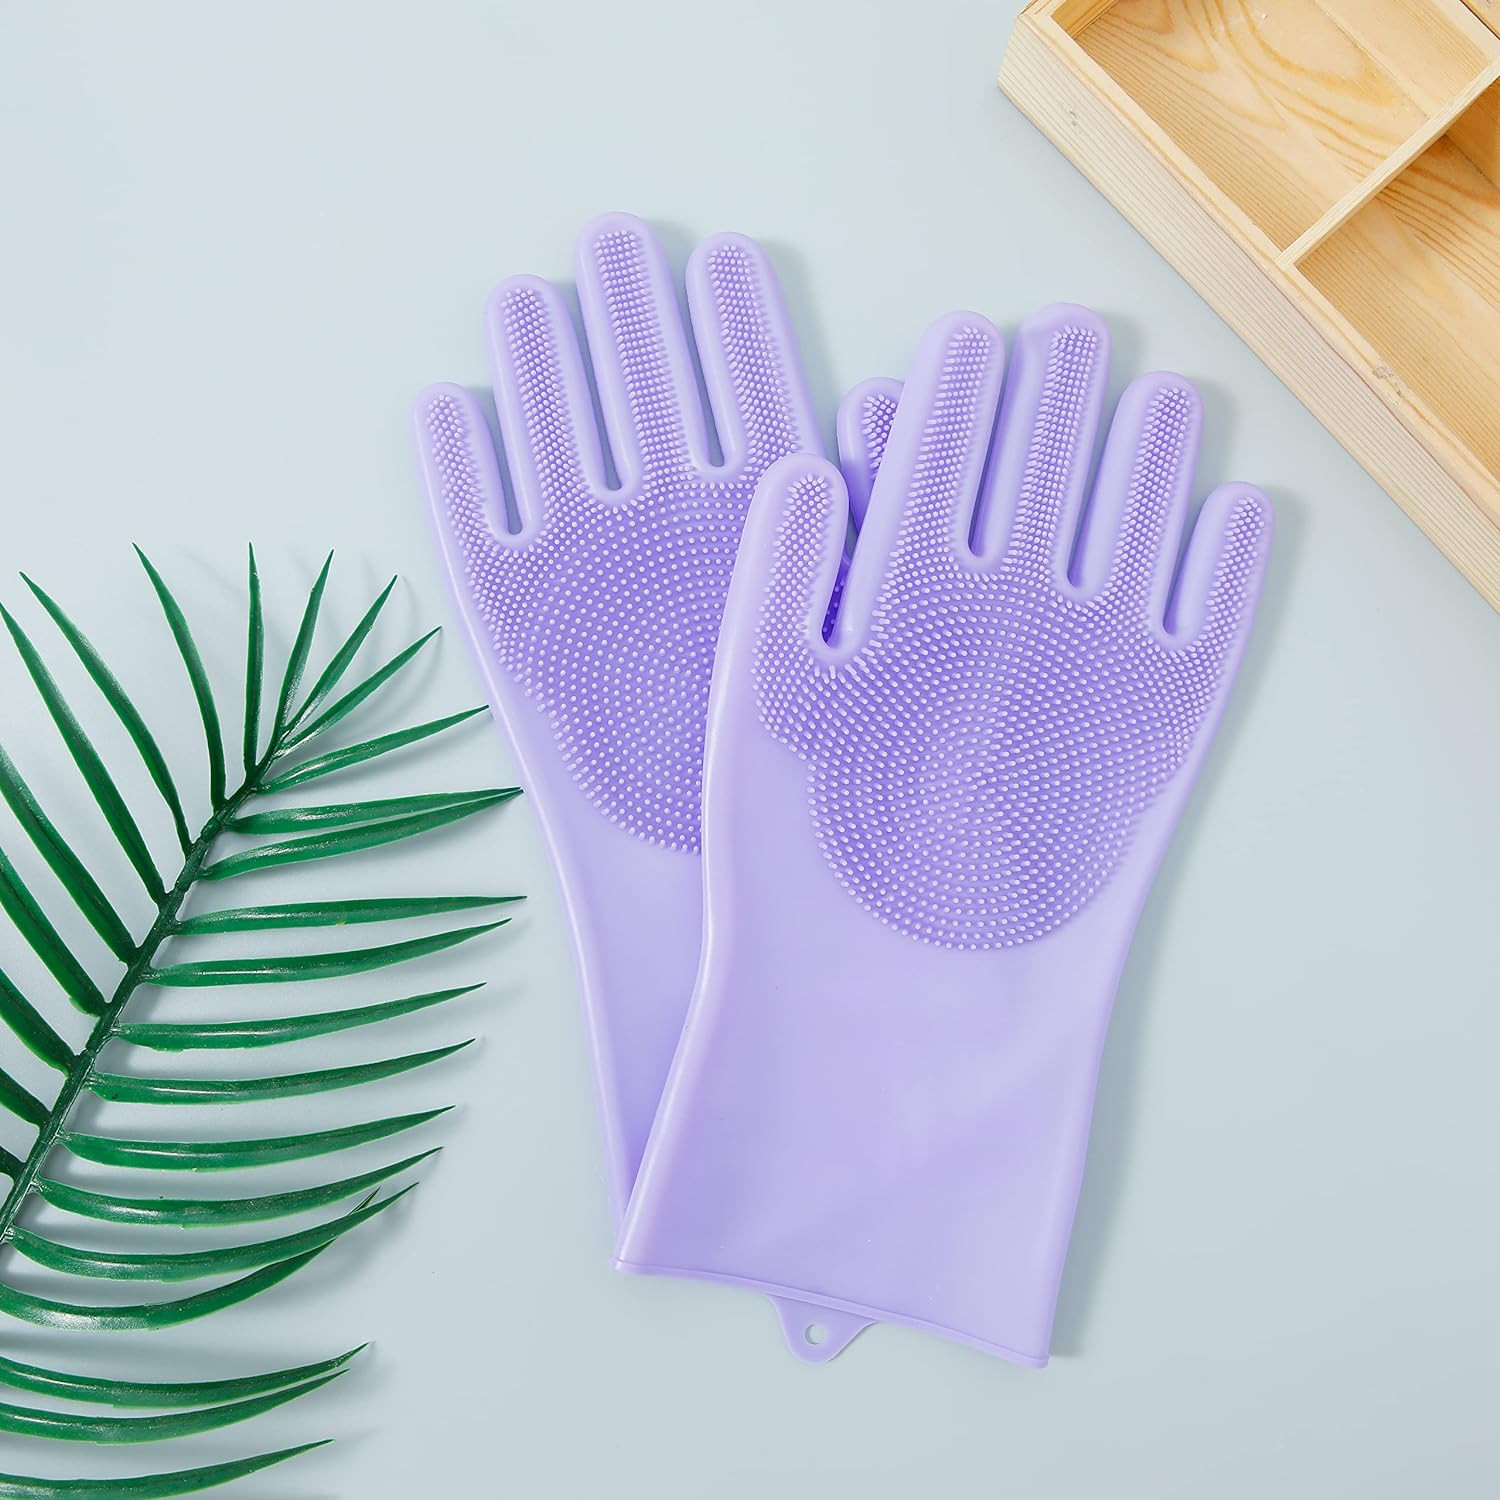 Kuber Industries Multi-Purpose Silicon Gloves For Kitchen Cleaning, Pet Grooming & Gardening|Reusable Gardening Gloves|Heat Resistant For Better Protection|Purple